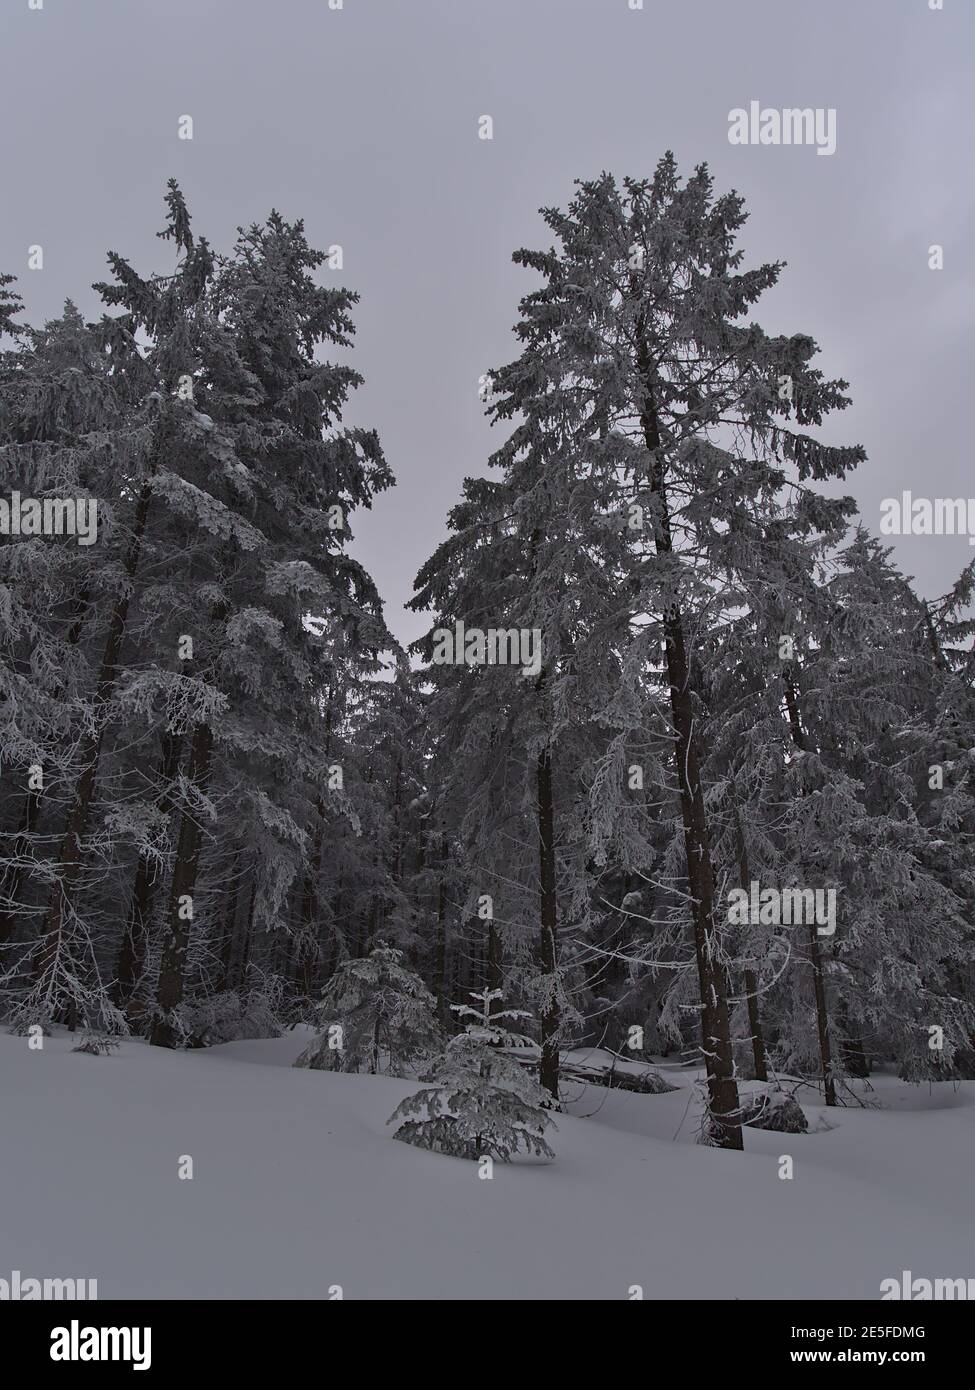 Peaceful winter landscape with portrait view of snow-covered coniferous trees with frozen branches near Schliffkopf peak, Germany in Black Forest. Stock Photo